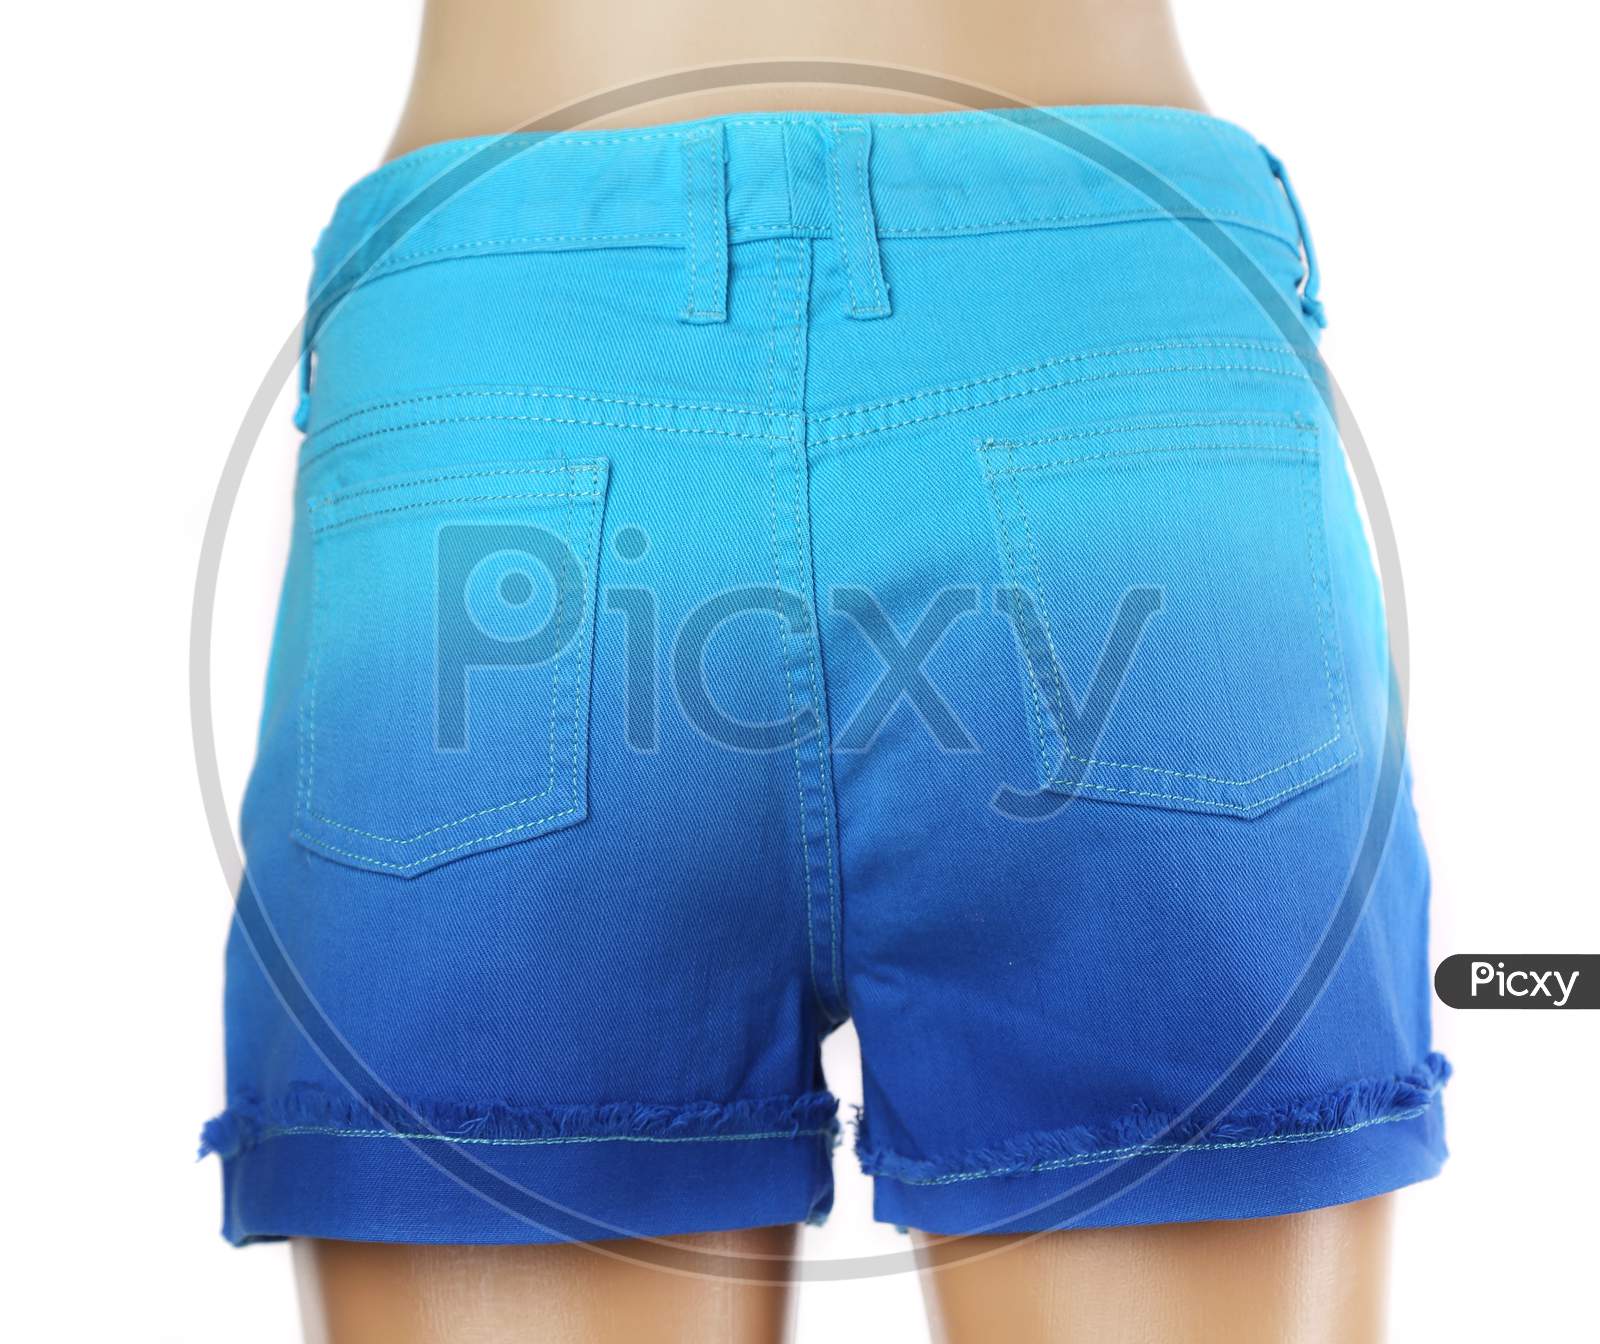 Blue Women Jeans Shorts. Isolated On A White Background.